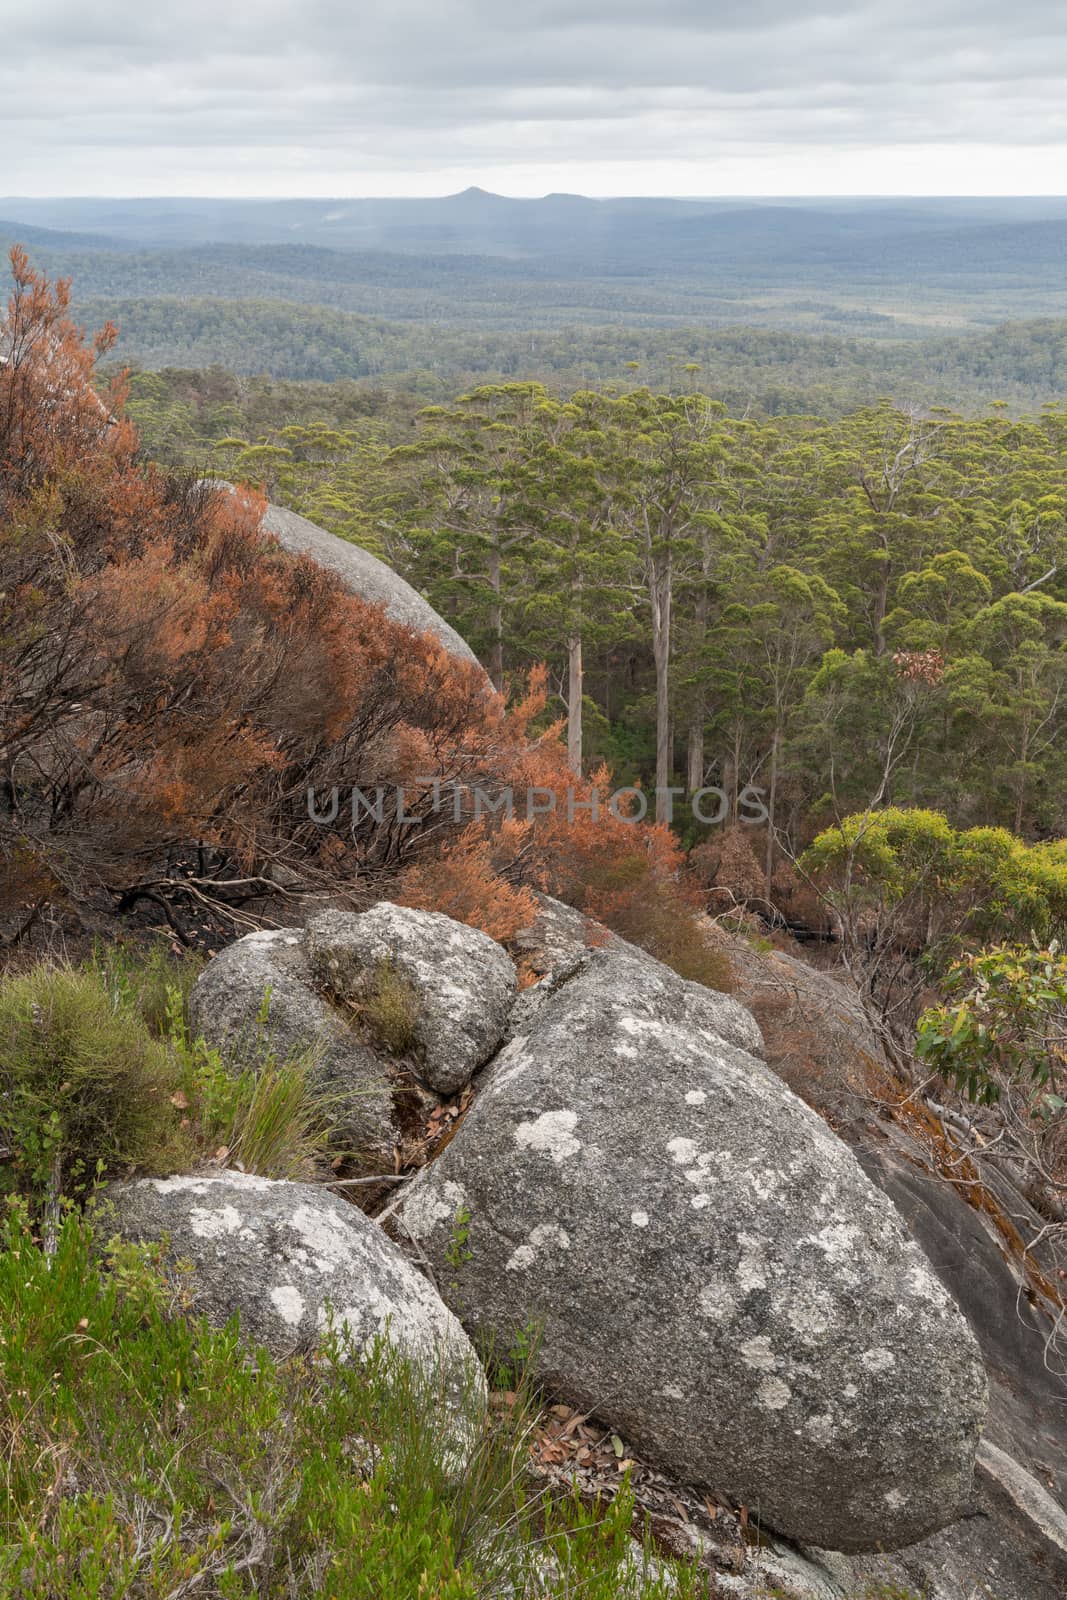 Panoramic view over the forests of the Mount Frankland National Park, Western Australia